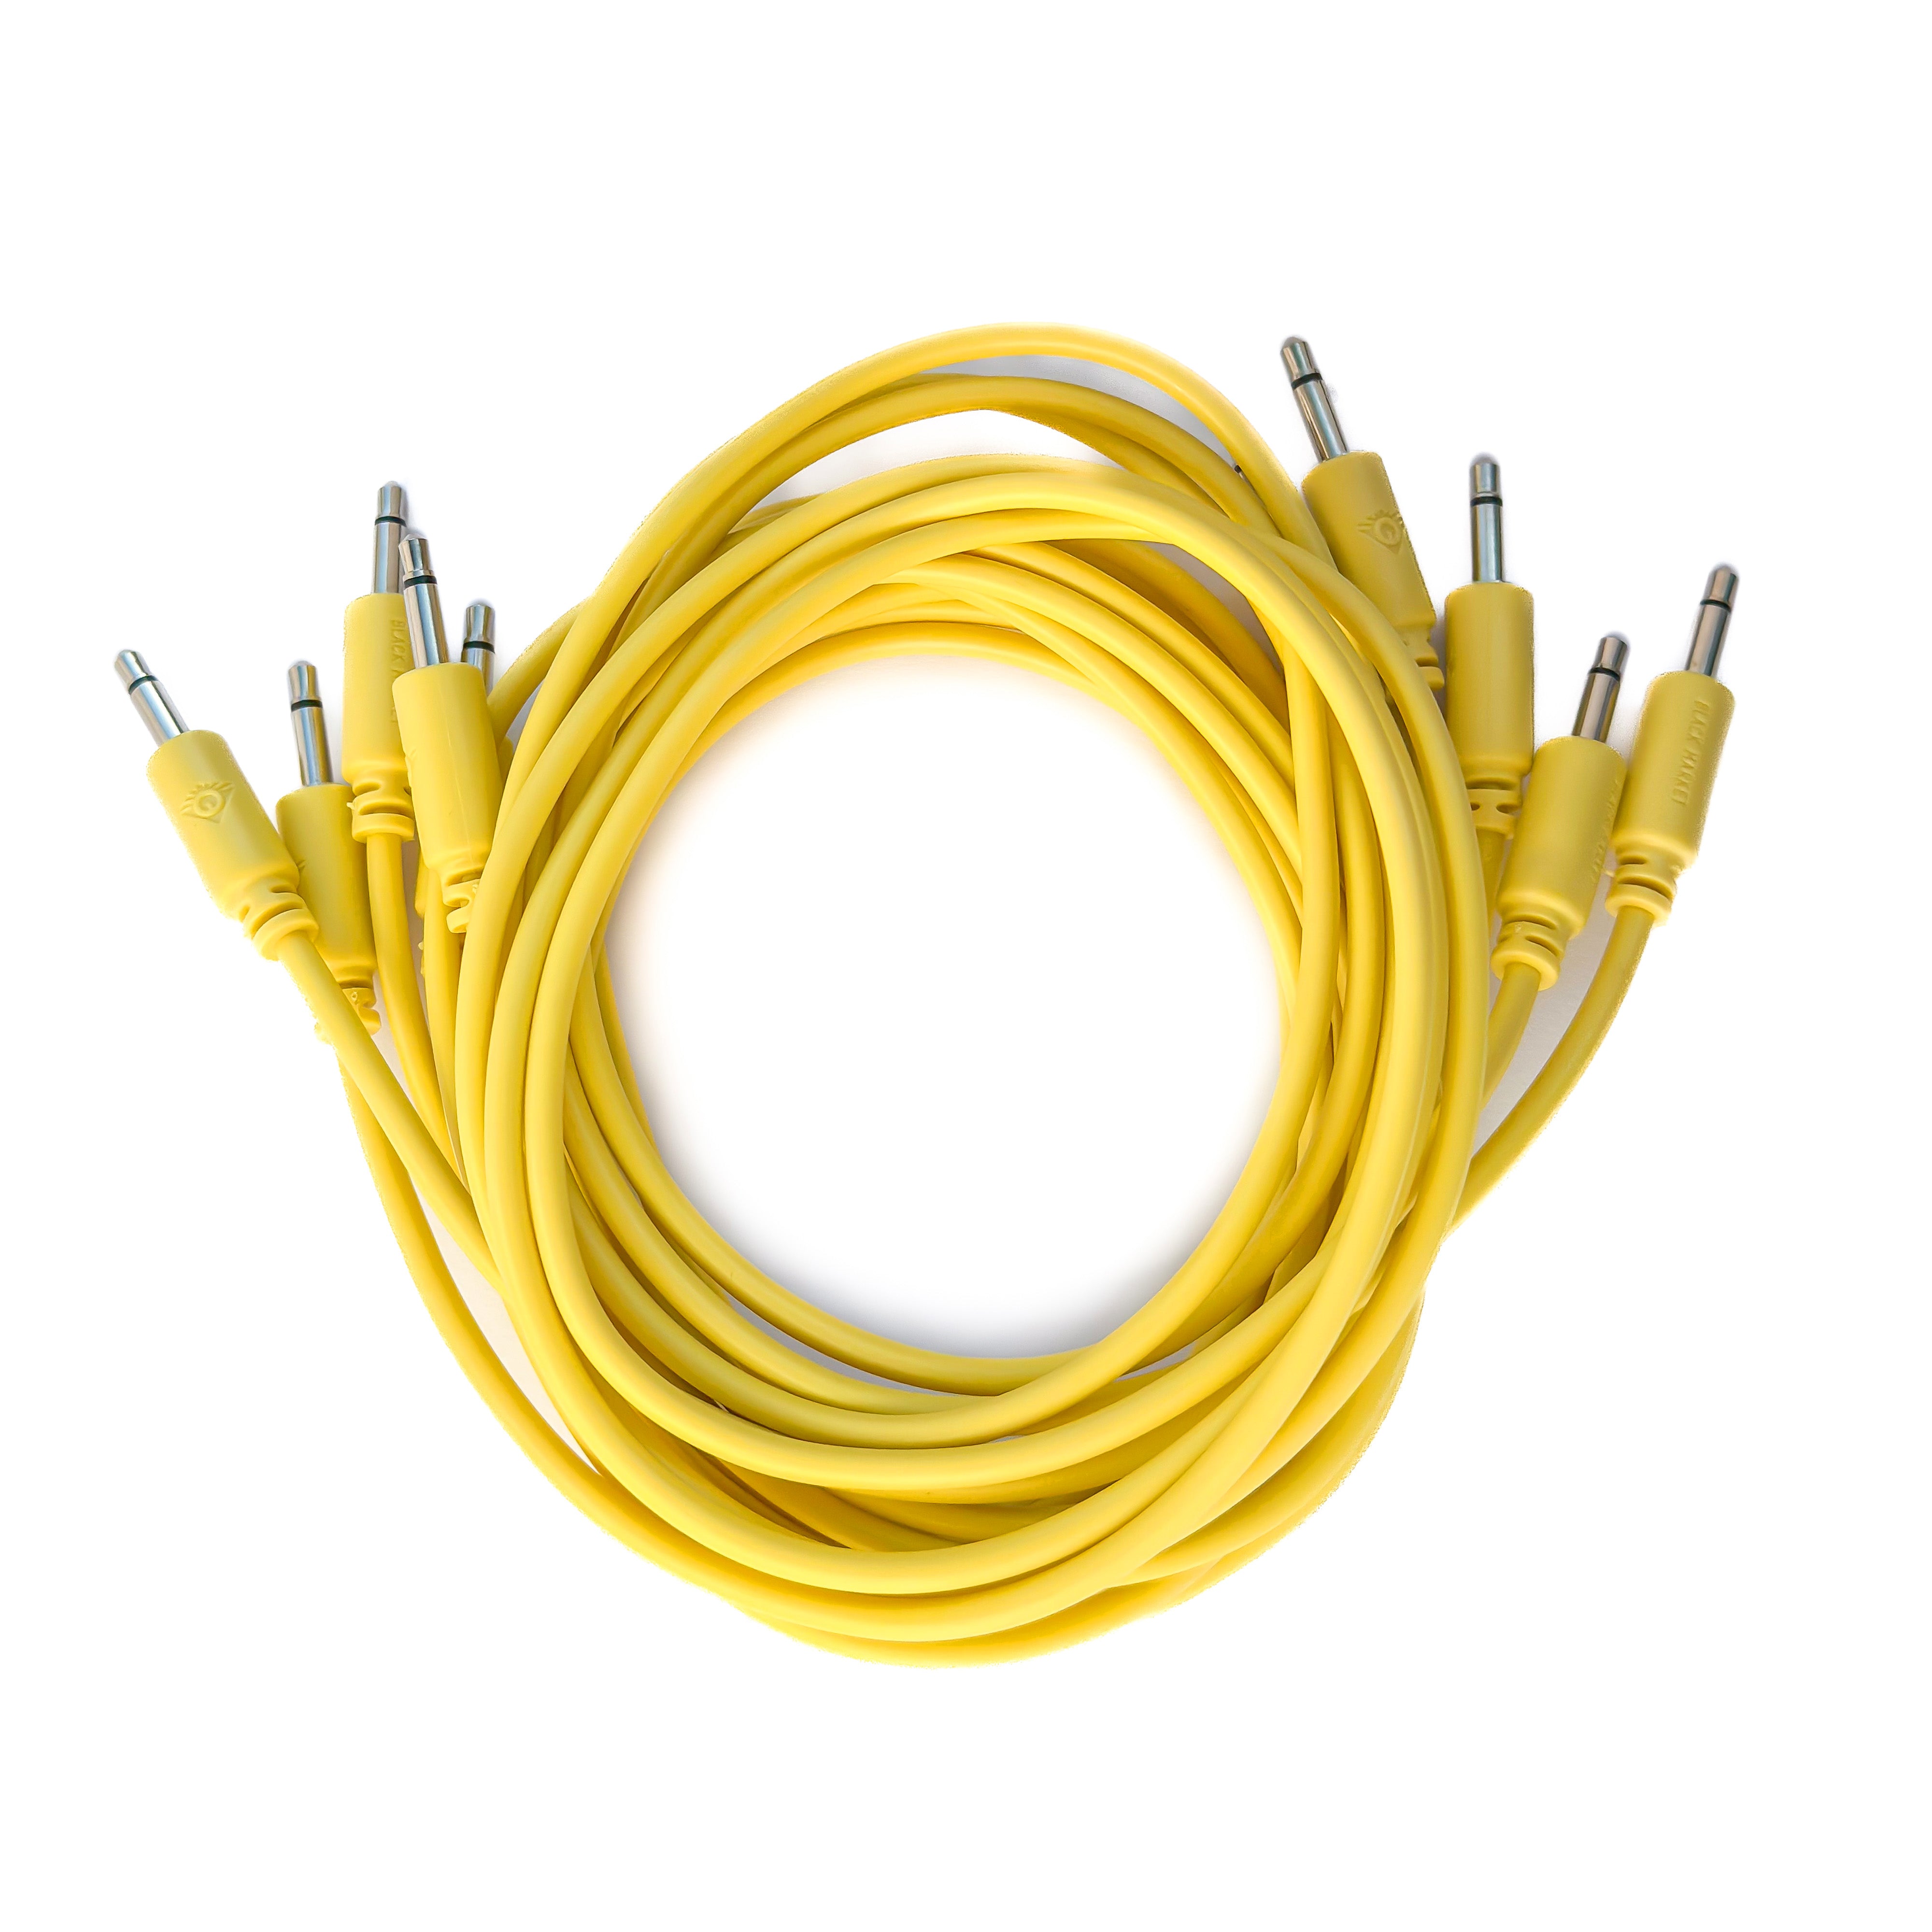 Black Market Modular 3.5mm Patch Cable 5-Pack - 100cm/40" - Yellow View 1